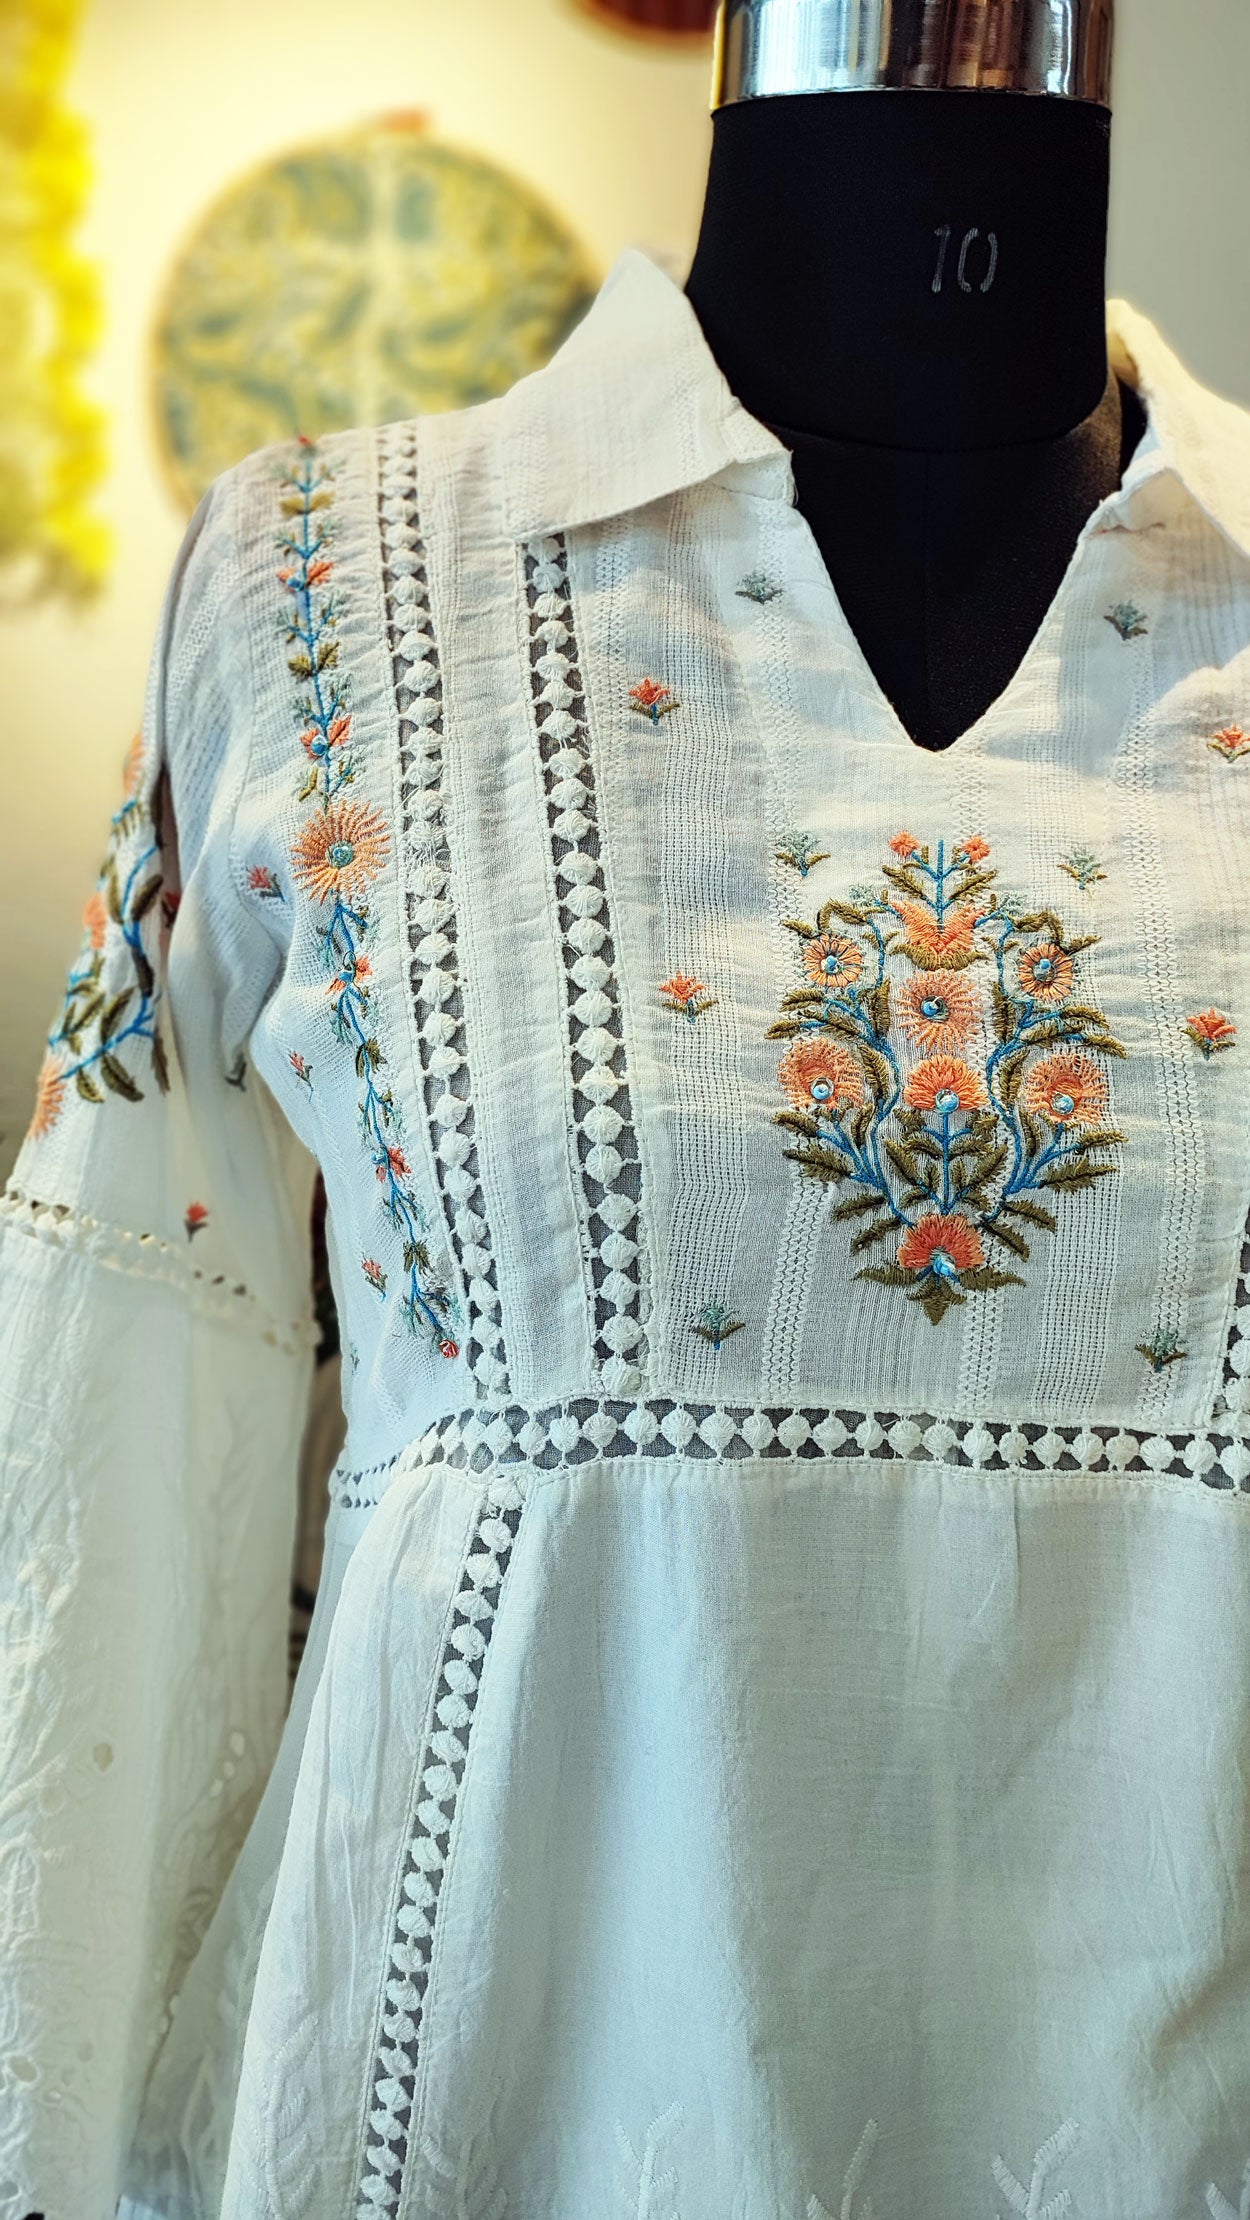 Moonlight White Collared Cotton Mulmul Top With Embroidery